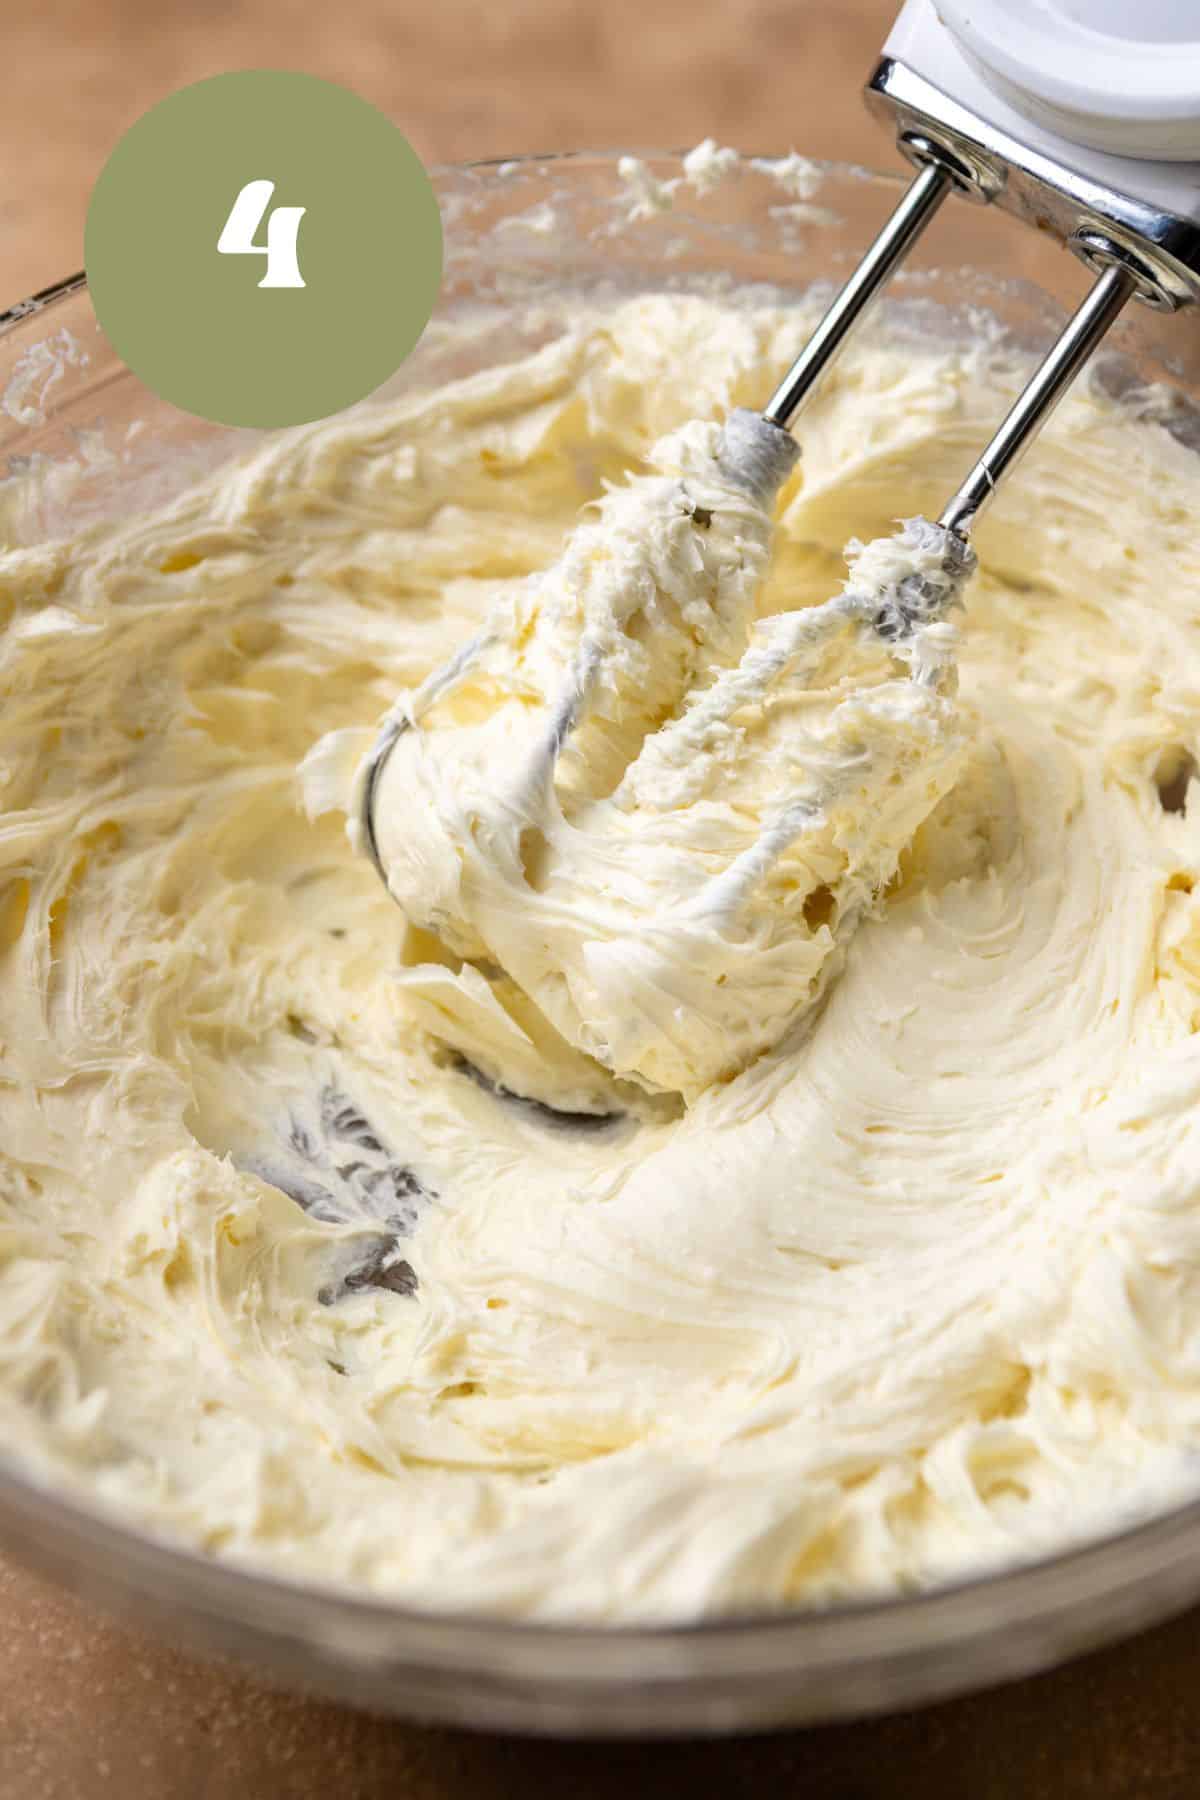 Creamed cream cheese and sugar in a bowl with a hand mixer.